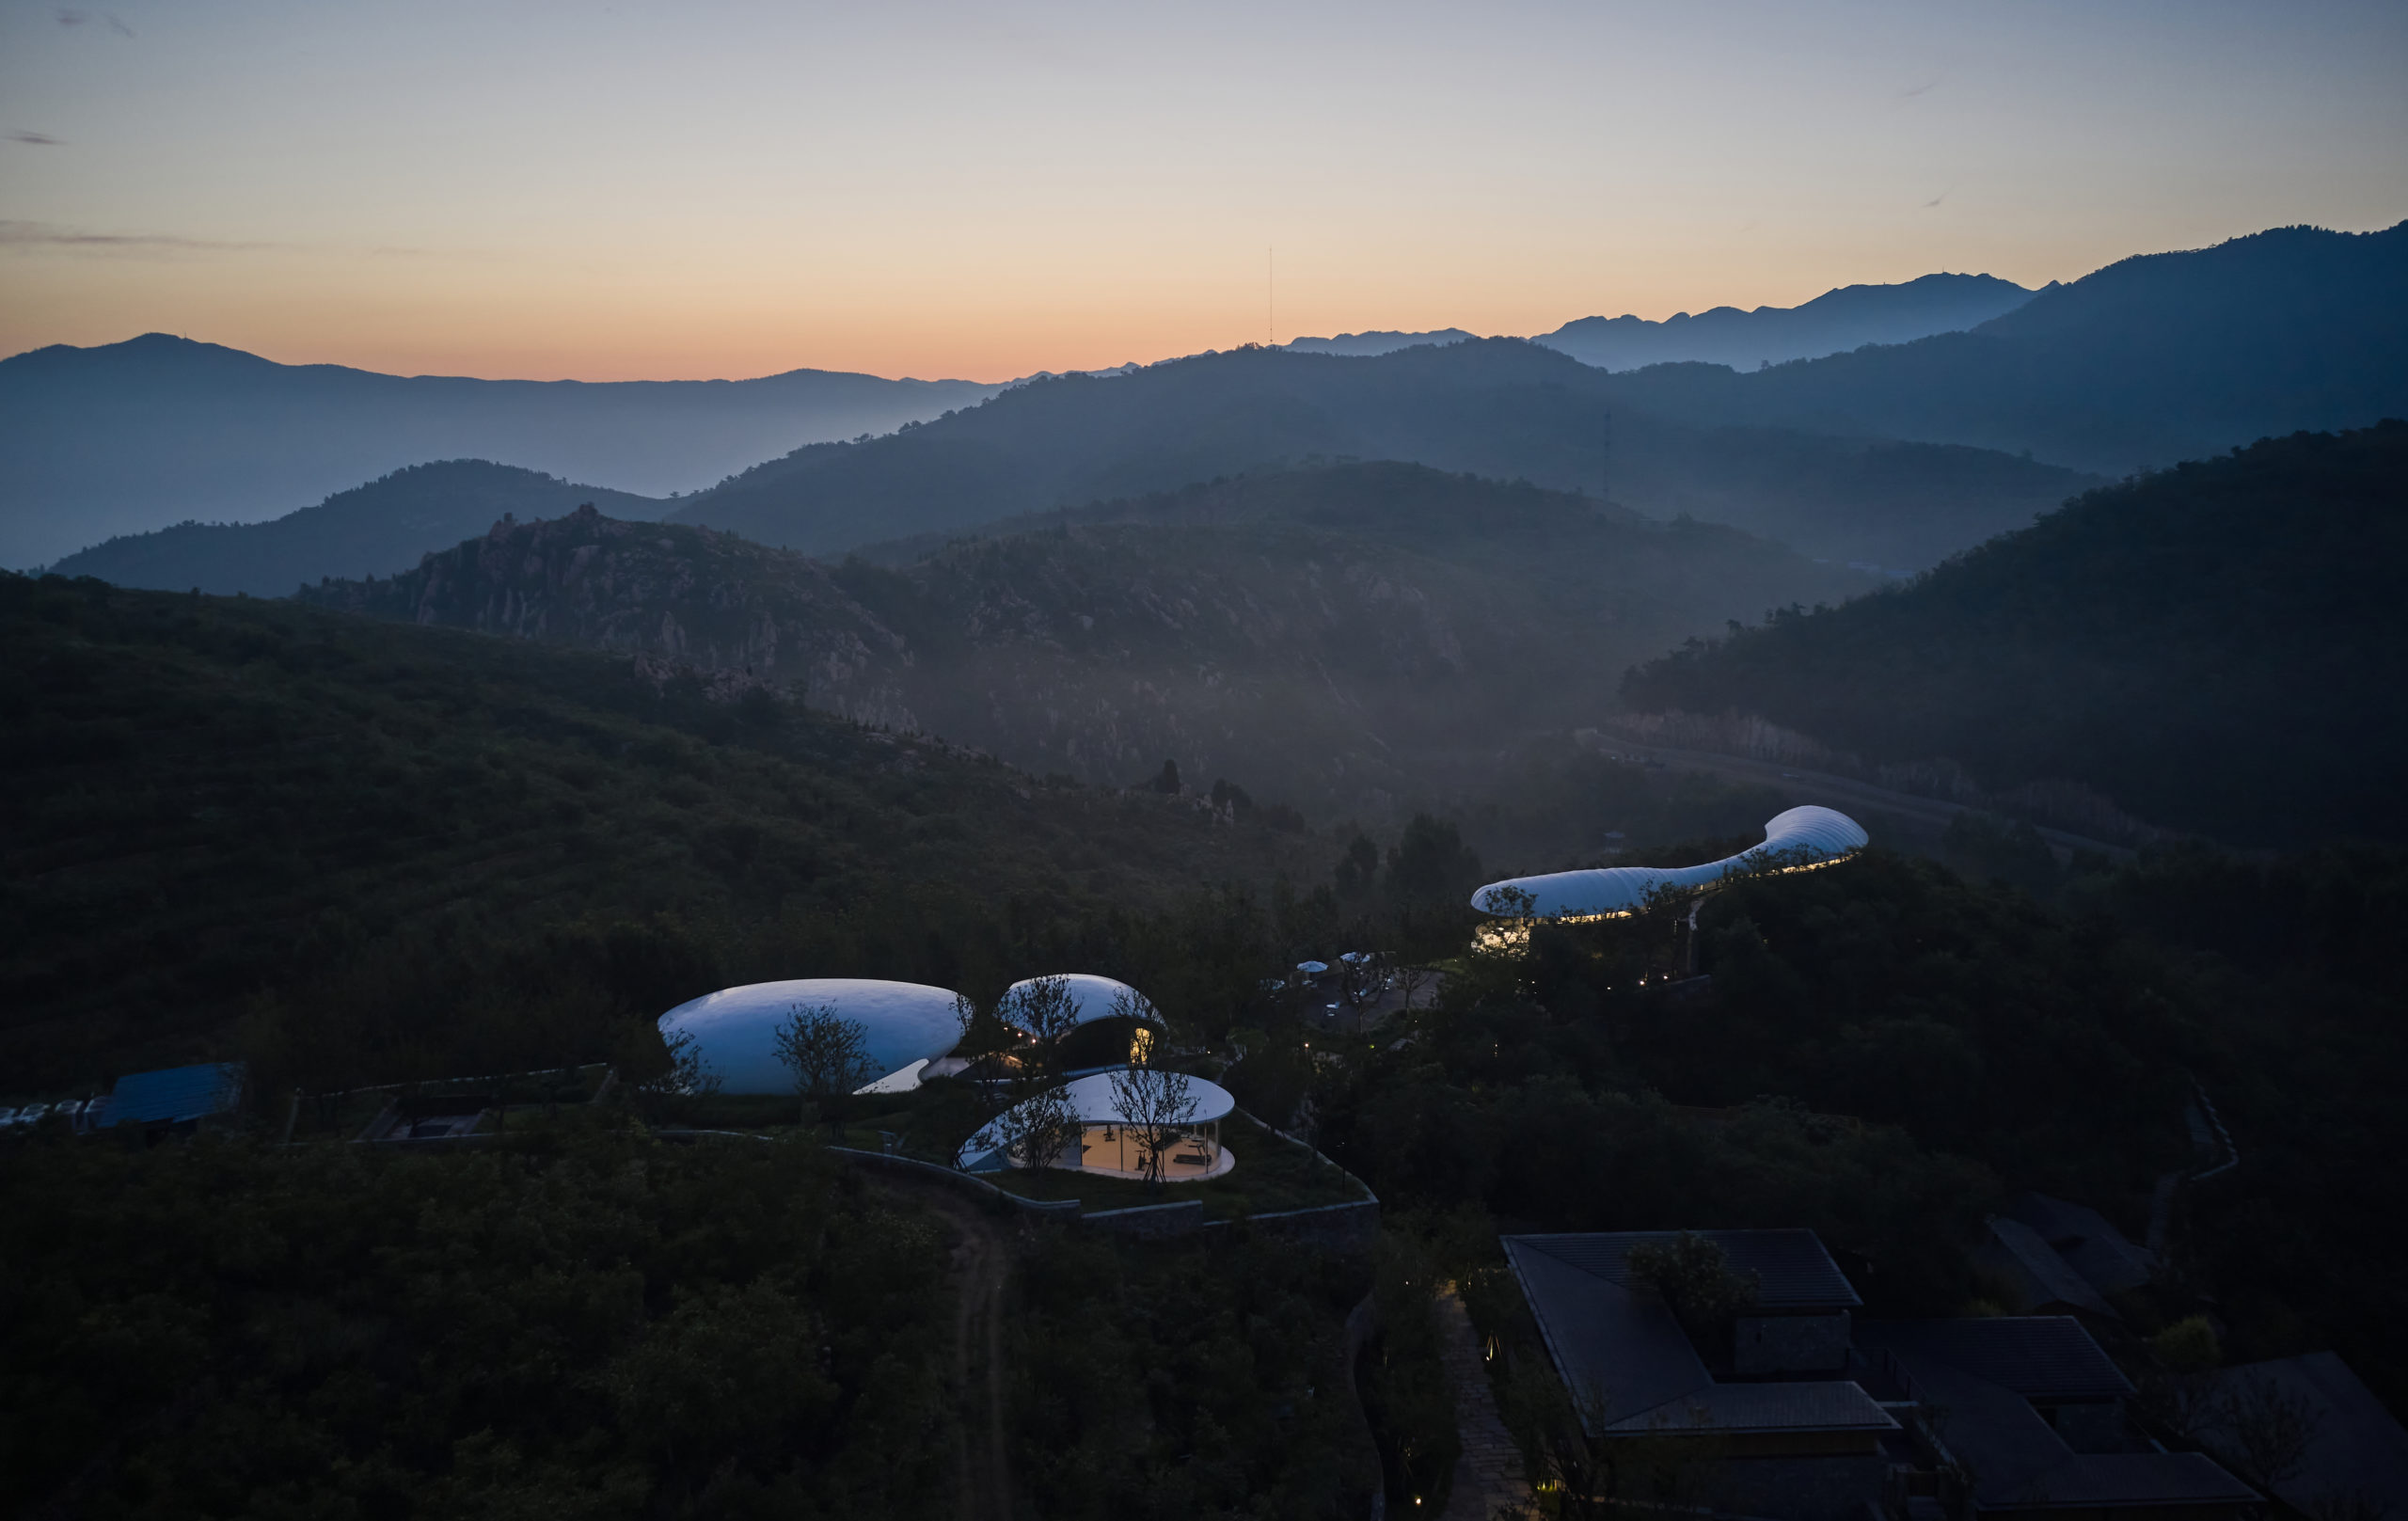 Jiunvfneg Bubble Pool and Supporting Facilities on Mount Tai by line+, Tai'an, China